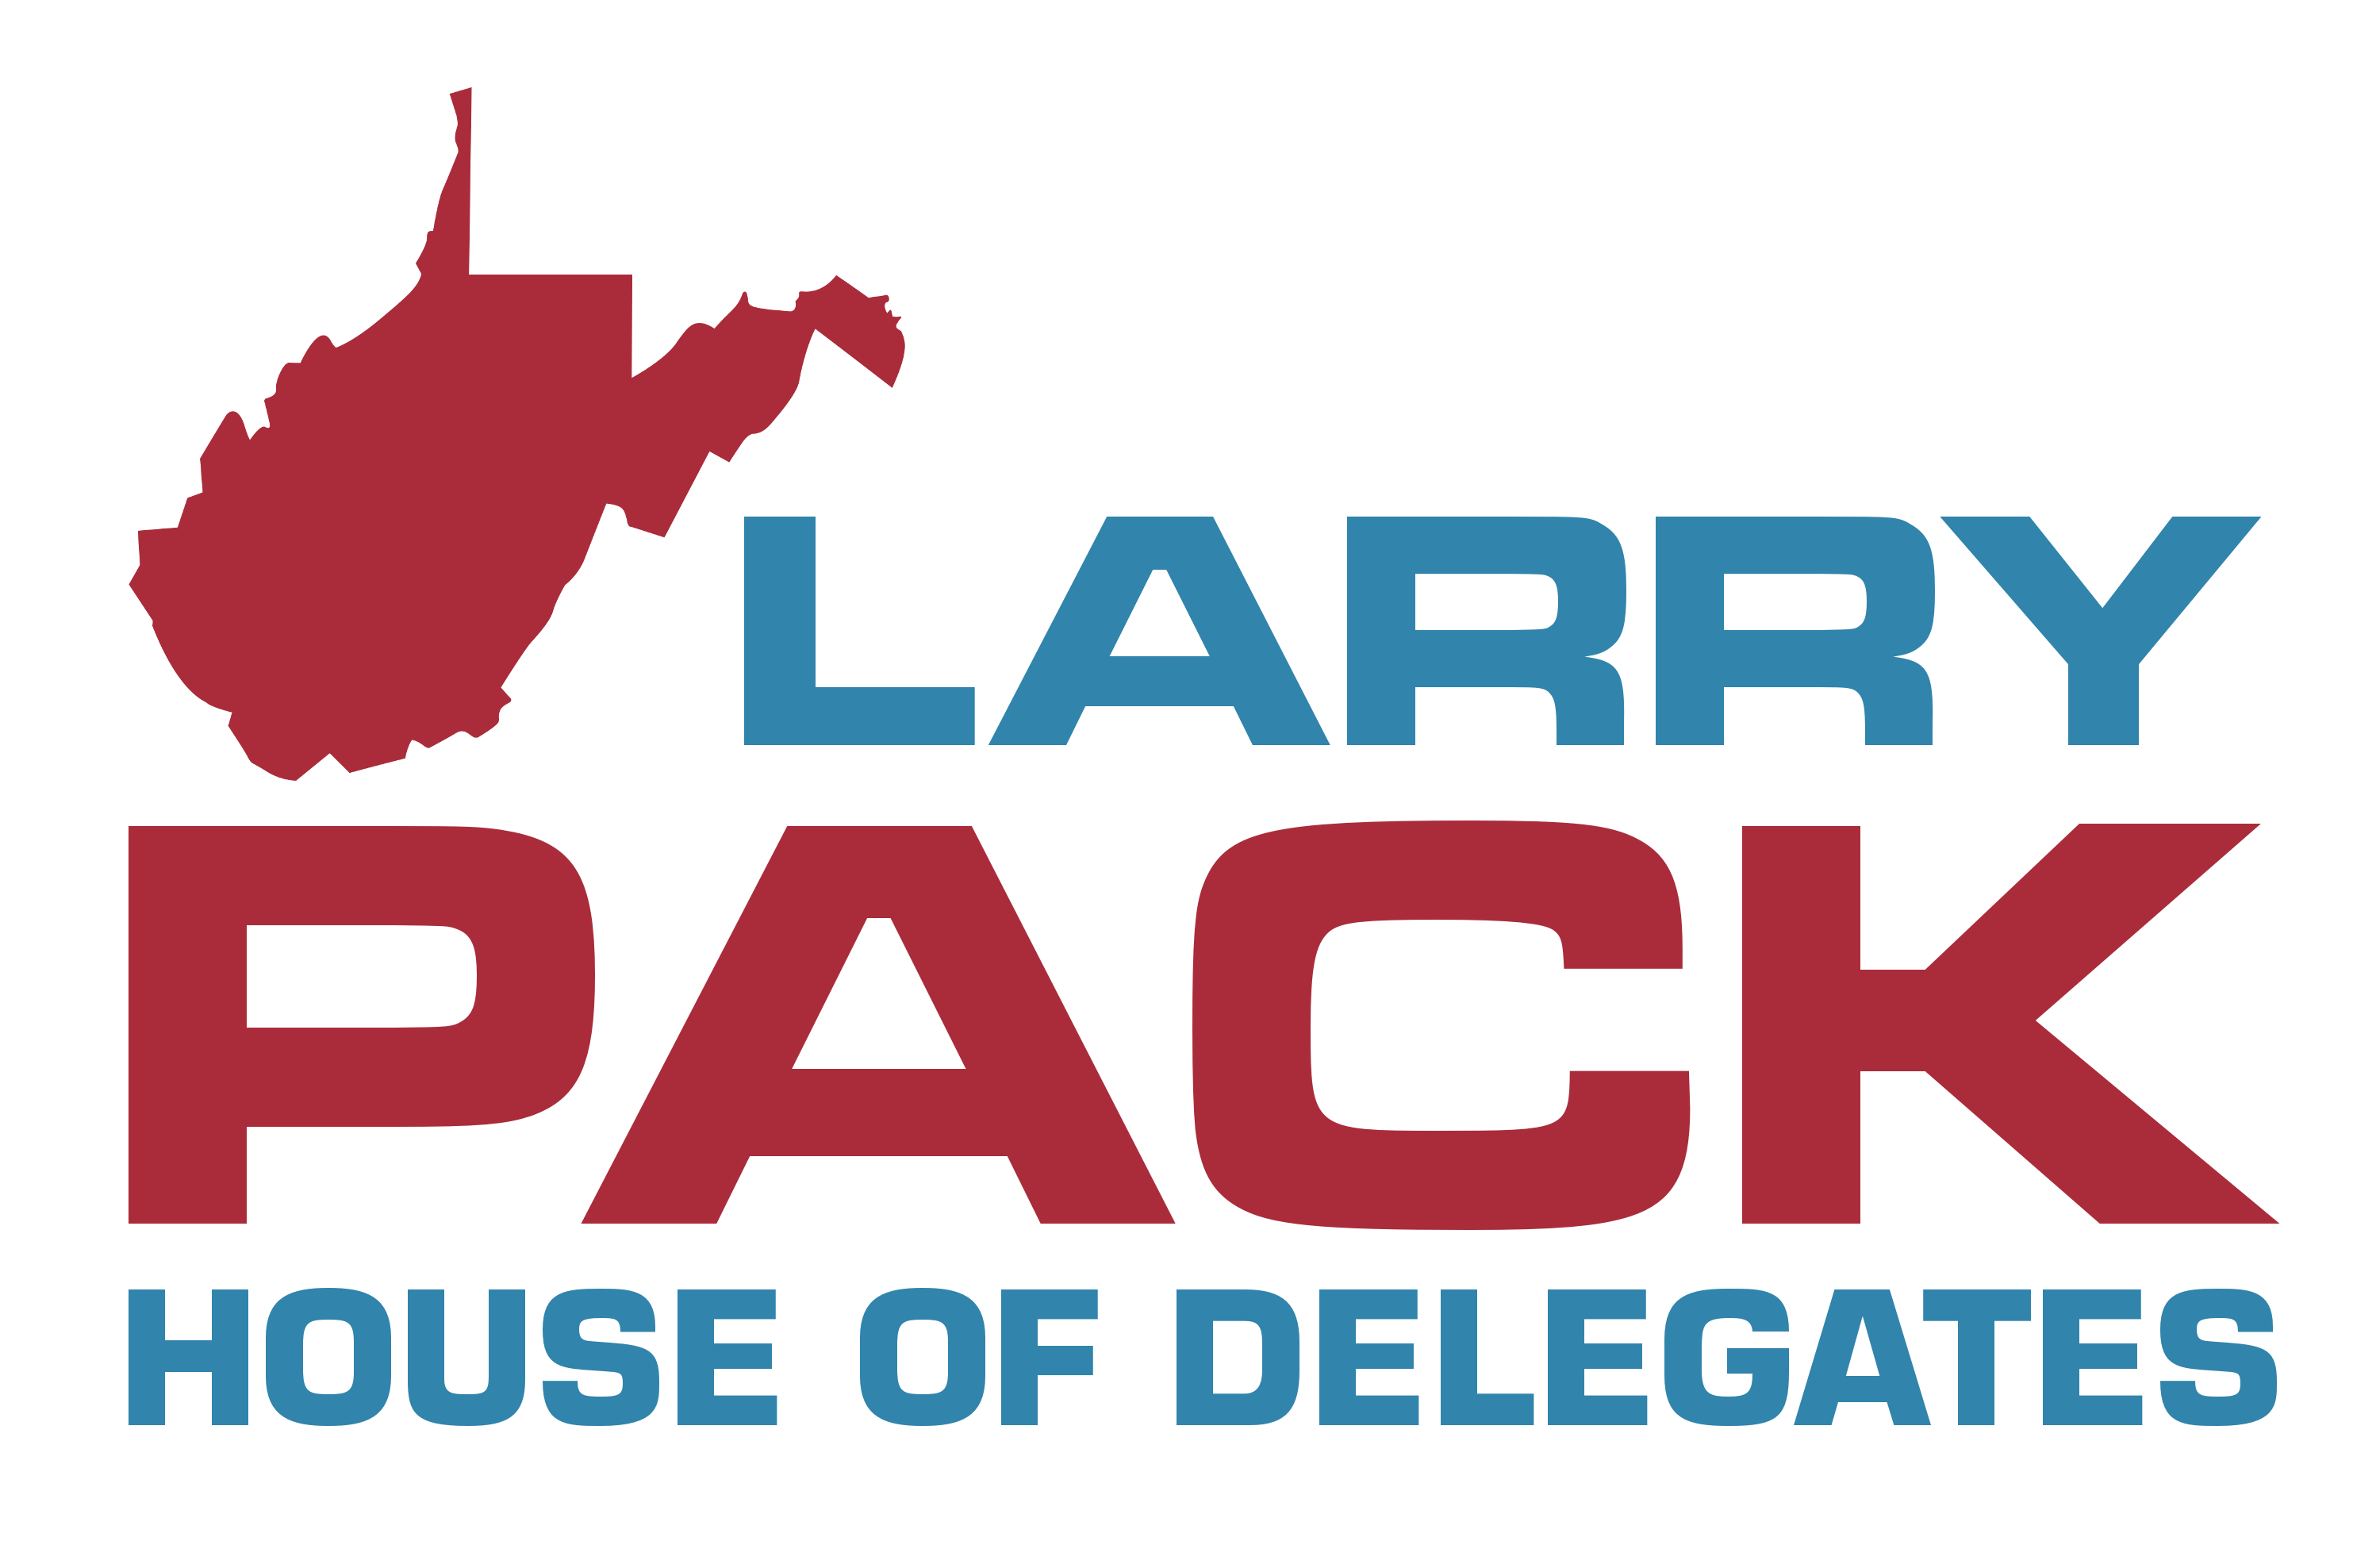 Larry Pack for West Virginia